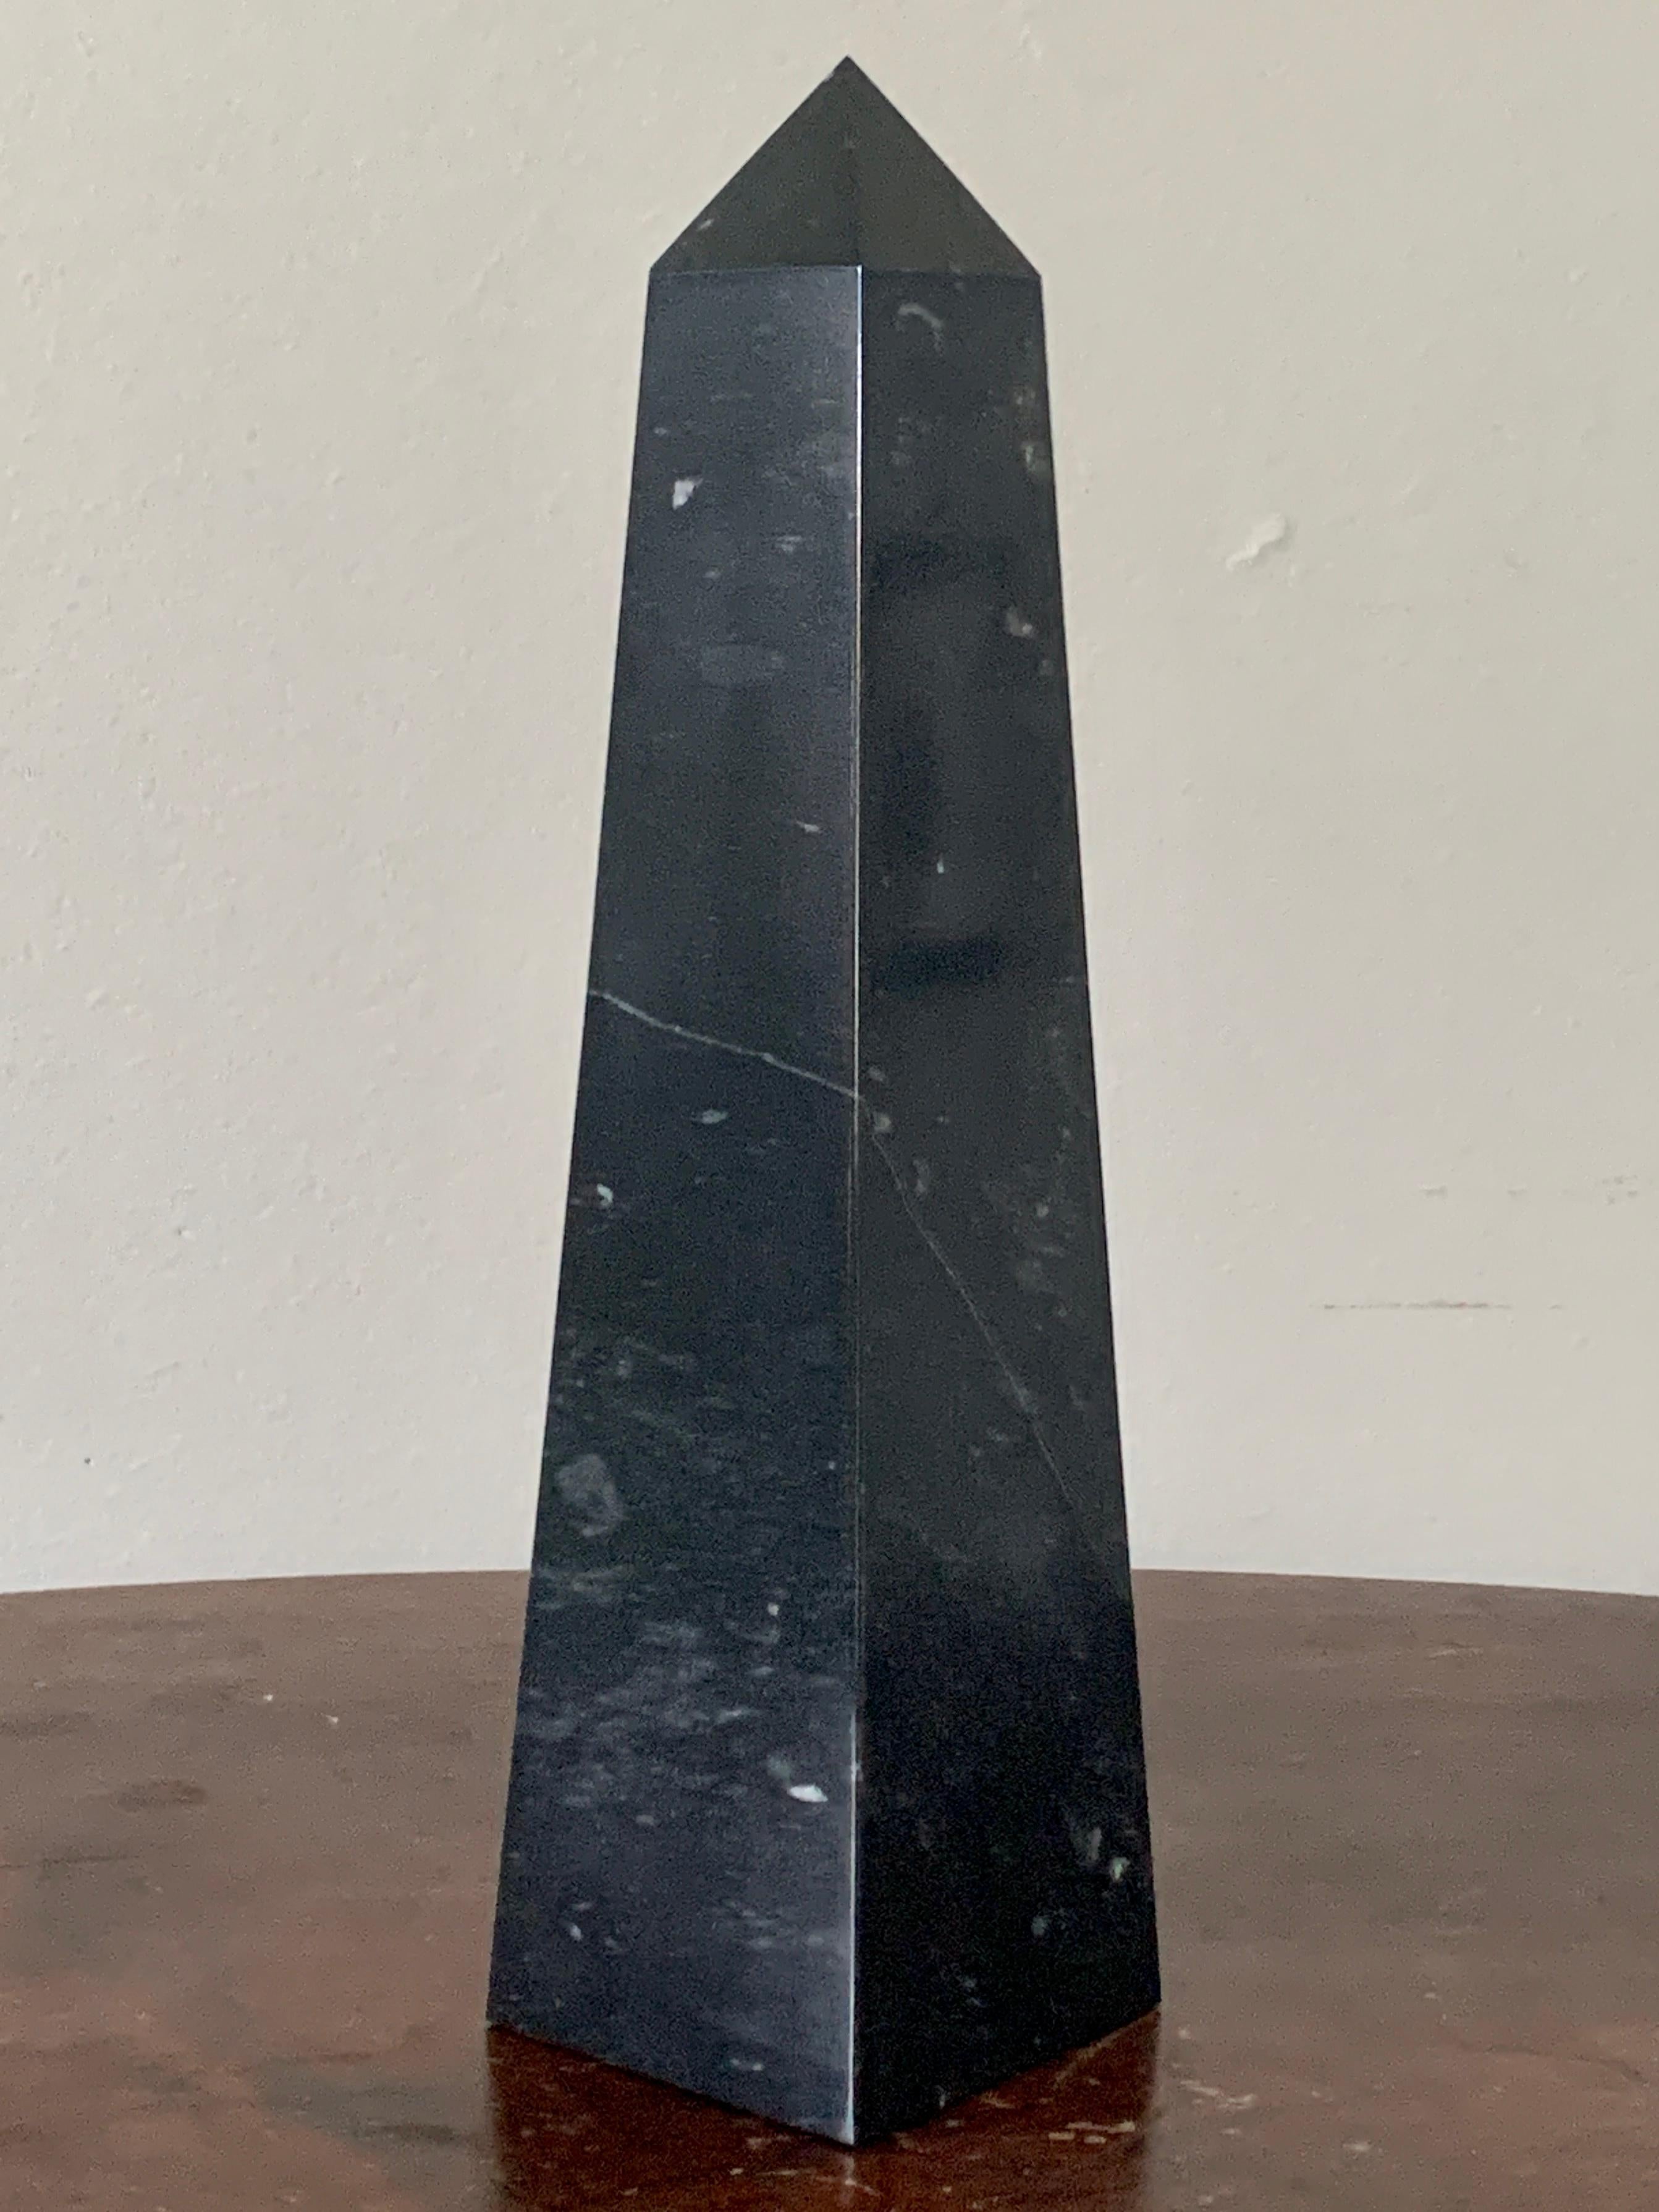 Neoclassical Solid Marble Black and Gray Obelisk In Good Condition For Sale In Elkhart, IN